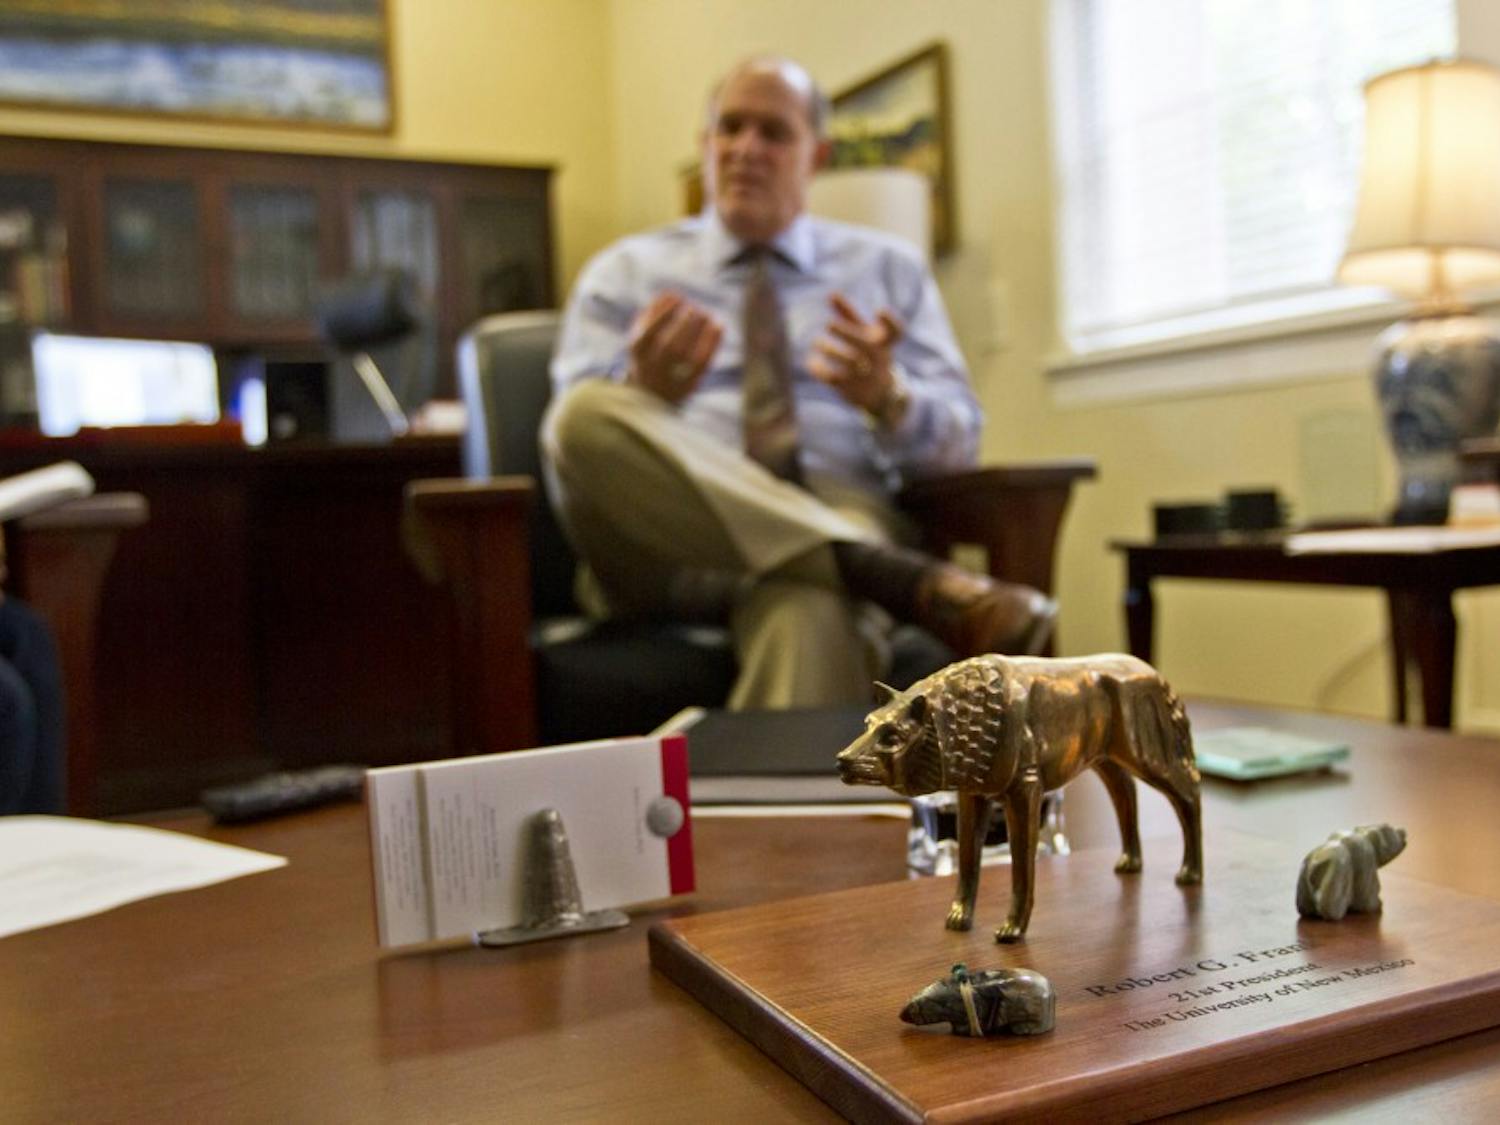 Current UNM President Bob Frank sits in his office during an interview in late 2013. Earlier this semester Frank announced he would not seek a contract renewal following the end of this tenure in May, and the University is searching for his successor.